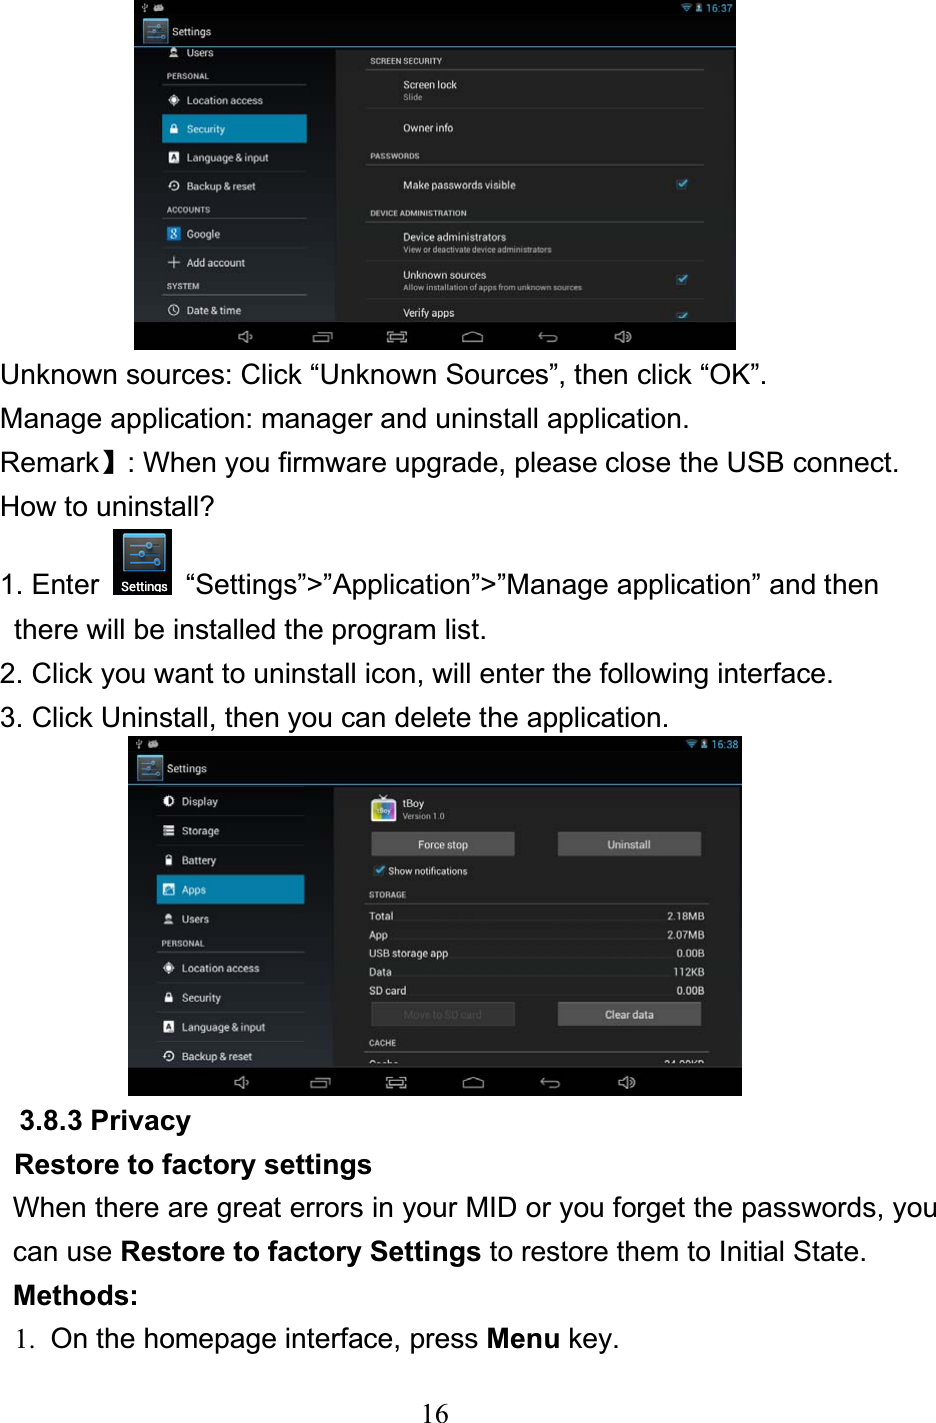 16Unknown sources: Click “Unknown Sources”, then click “OK”. Manage application: manager and uninstall application. Remarkǐ: When you firmware upgrade, please close the USB connect. How to uninstall? 1. Enter    “Settings”&gt;”Application”&gt;”Manage application” and then   there will be installed the program list. 2. Click you want to uninstall icon, will enter the following interface.   3. Click Uninstall, then you can delete the application. 3.8.3 Privacy Restore to factory settings When there are great errors in your MID or you forget the passwords, you can use Restore to factory Settings to restore them to Initial State.   Methods: 1.  On the homepage interface, press Menu key. 